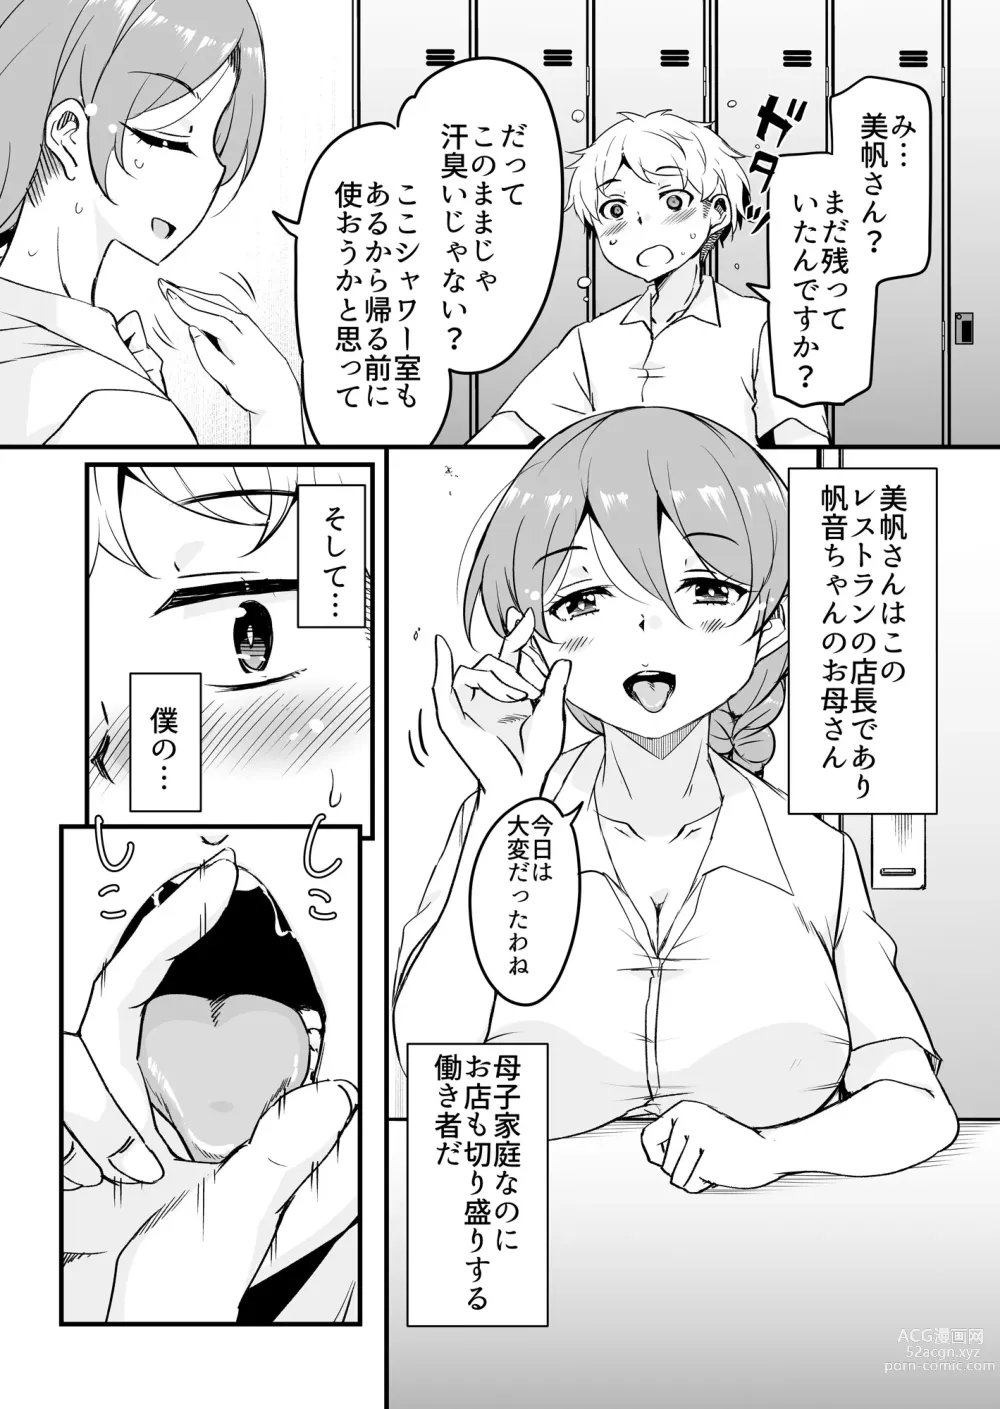 Page 10 of doujinshi 人妻店長〜娘の彼氏お借りします〜